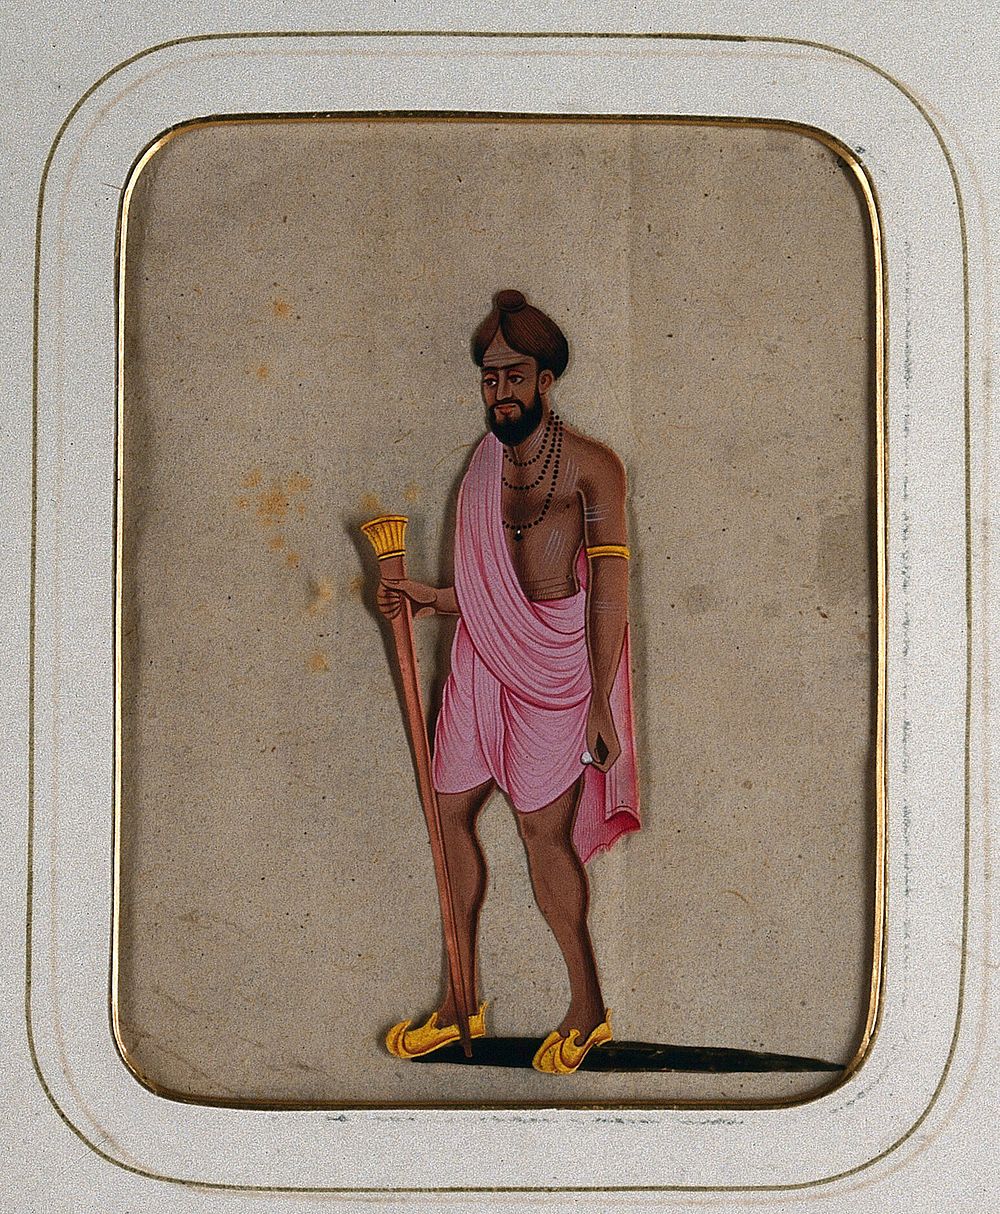 A sanyasi with a pink cloth draped around him carrying a staff. Gouache painting on mica by an Indian artist.